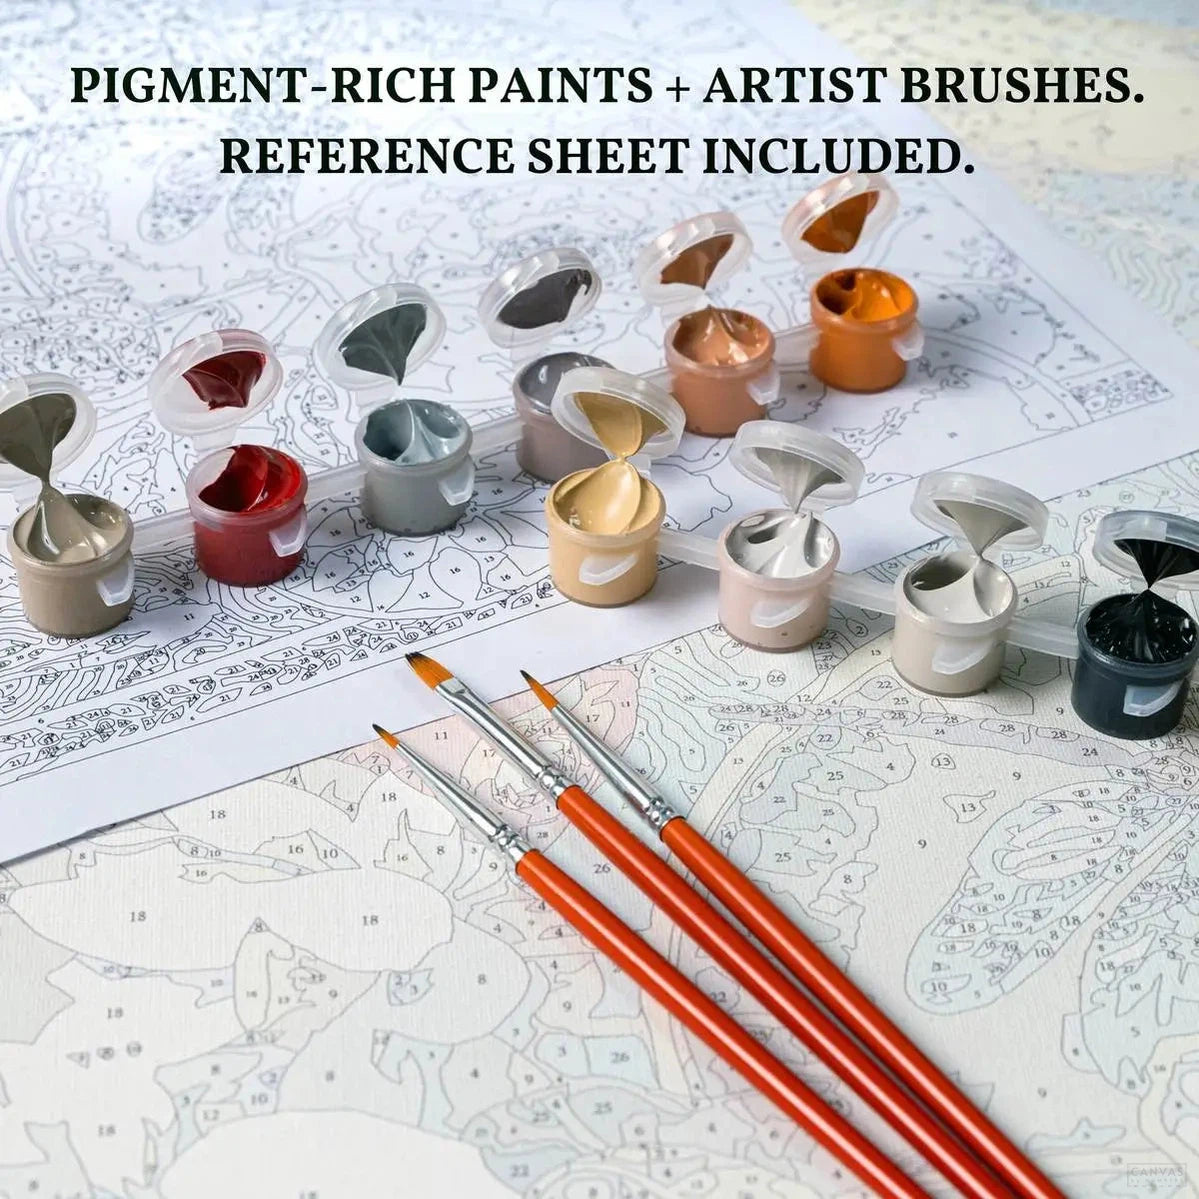 Alto Crafto Paint by Numbers Kit for Adults DIY Van Gogh starry night